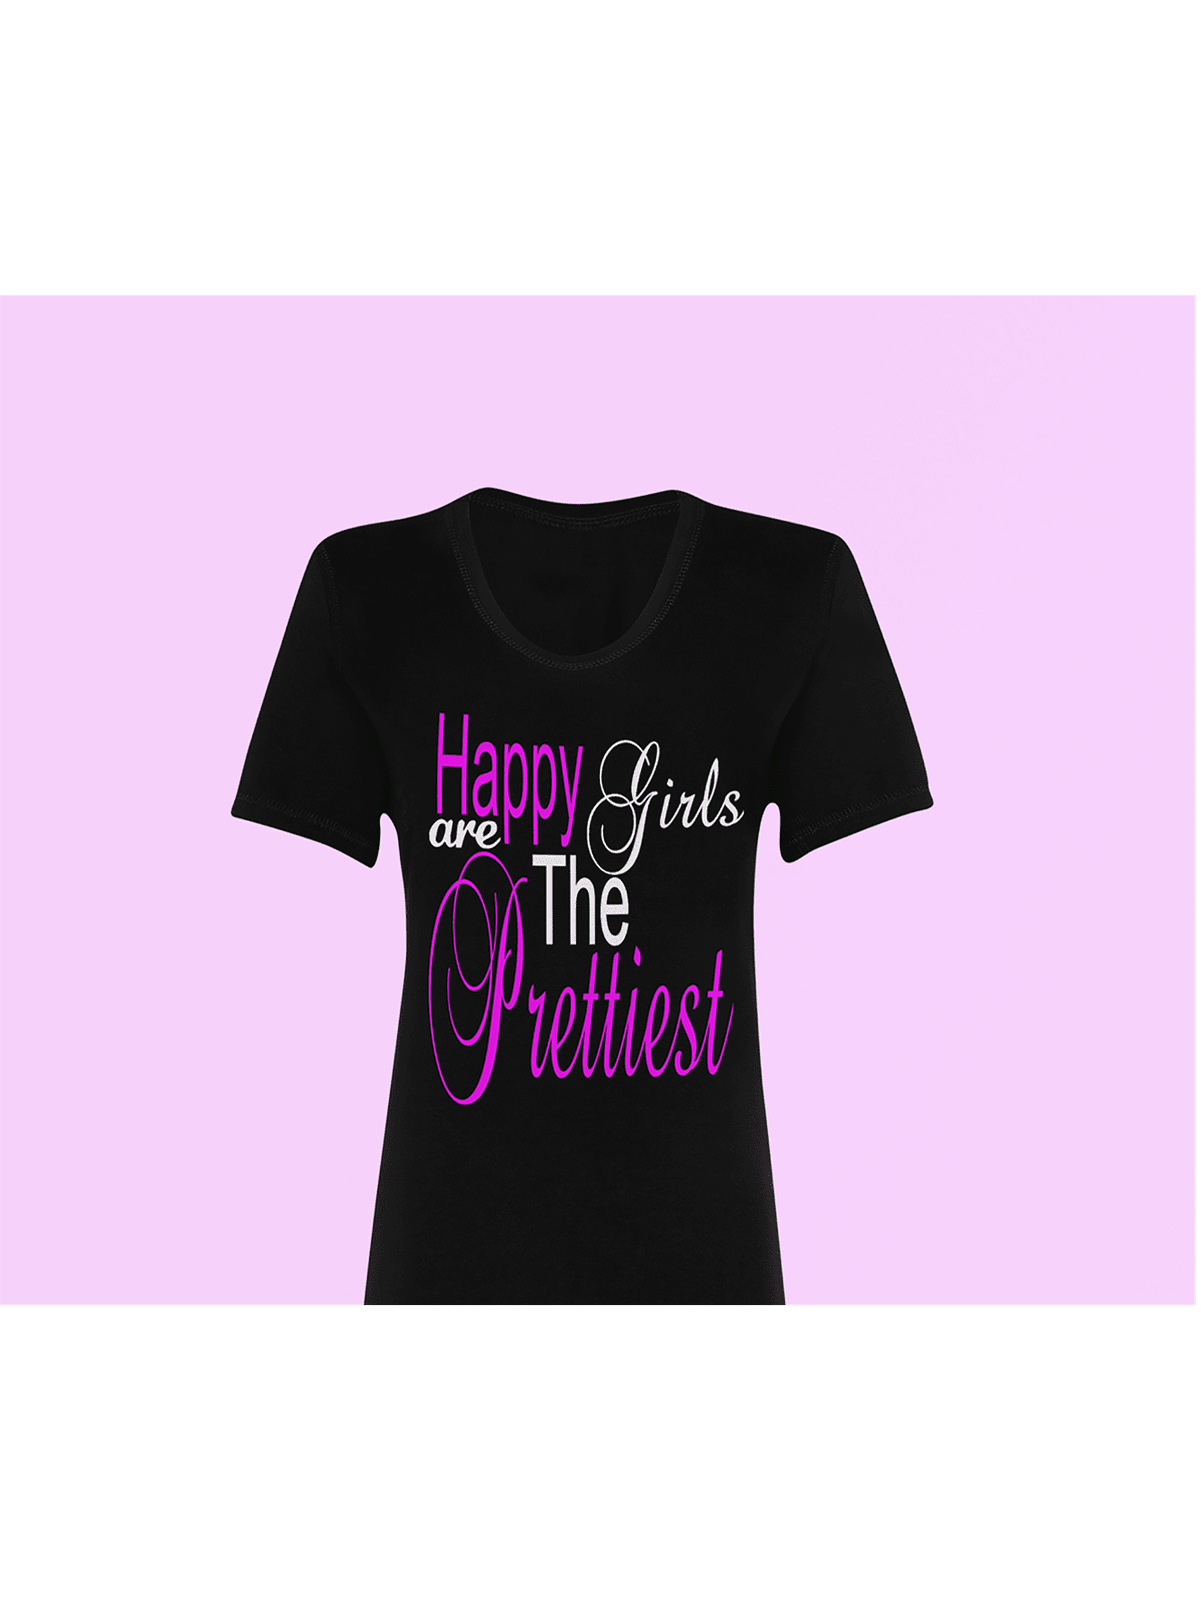 Happy Girl's Are The Prettiest - T-Shirt